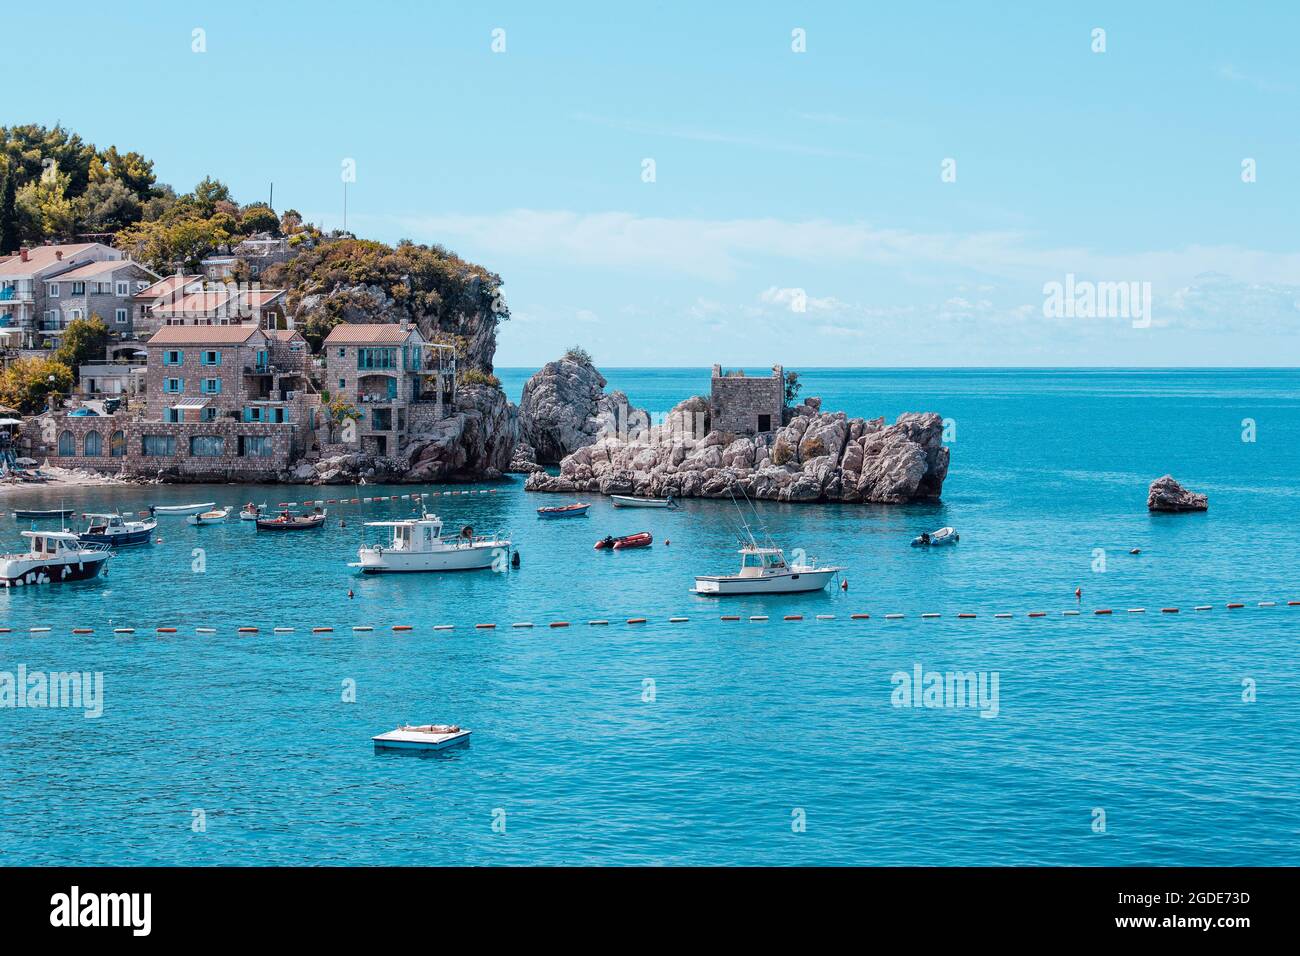 A picturesque sea bay among the mountains and rocks on the Adriatic sea coast. Mediterranean seascape with houses tiled roofs and boats on bay Stock Photo